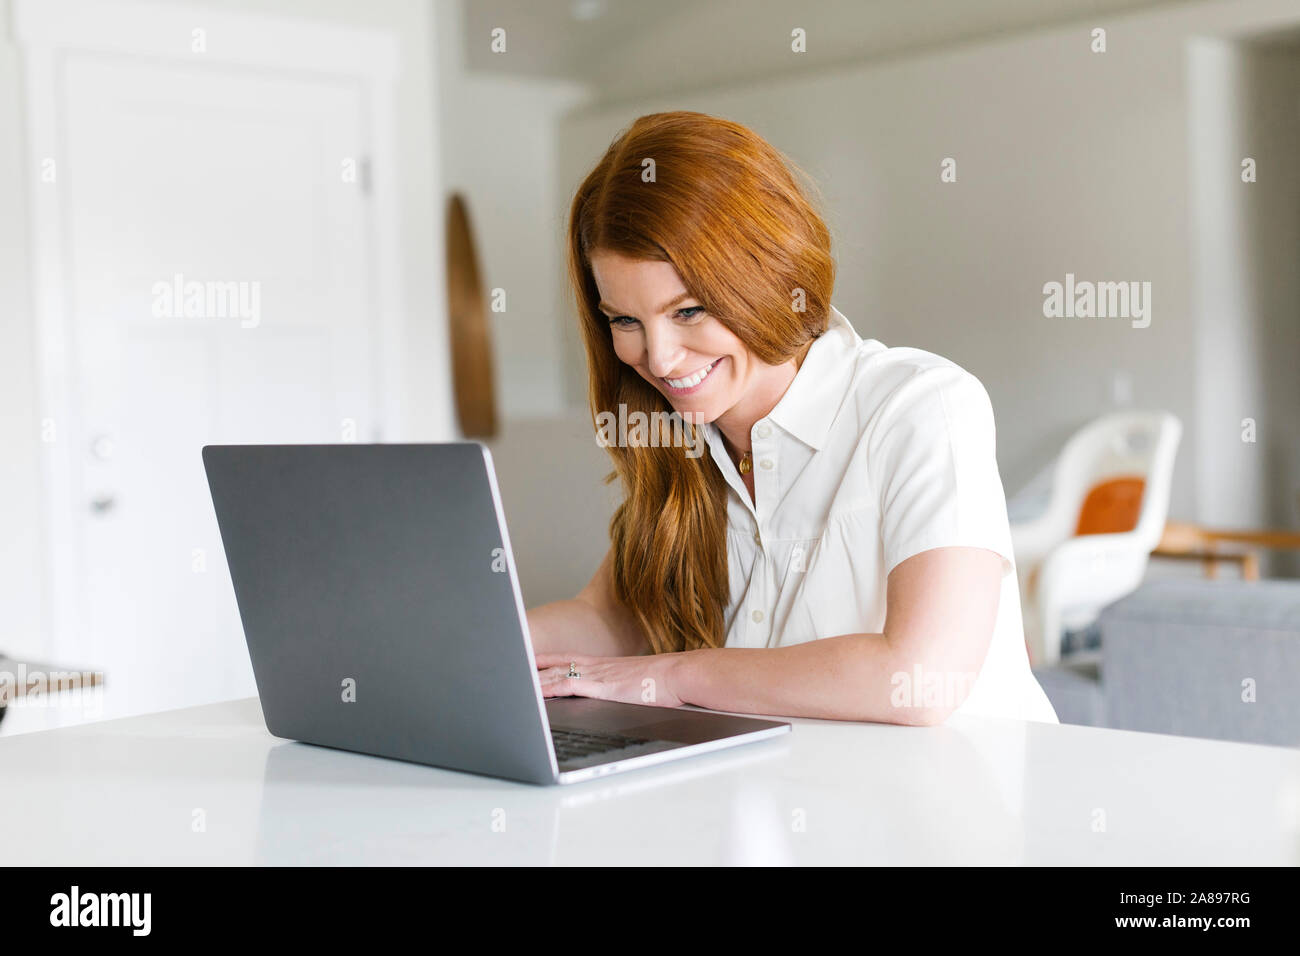 Smiling woman using laptop at home Banque D'Images